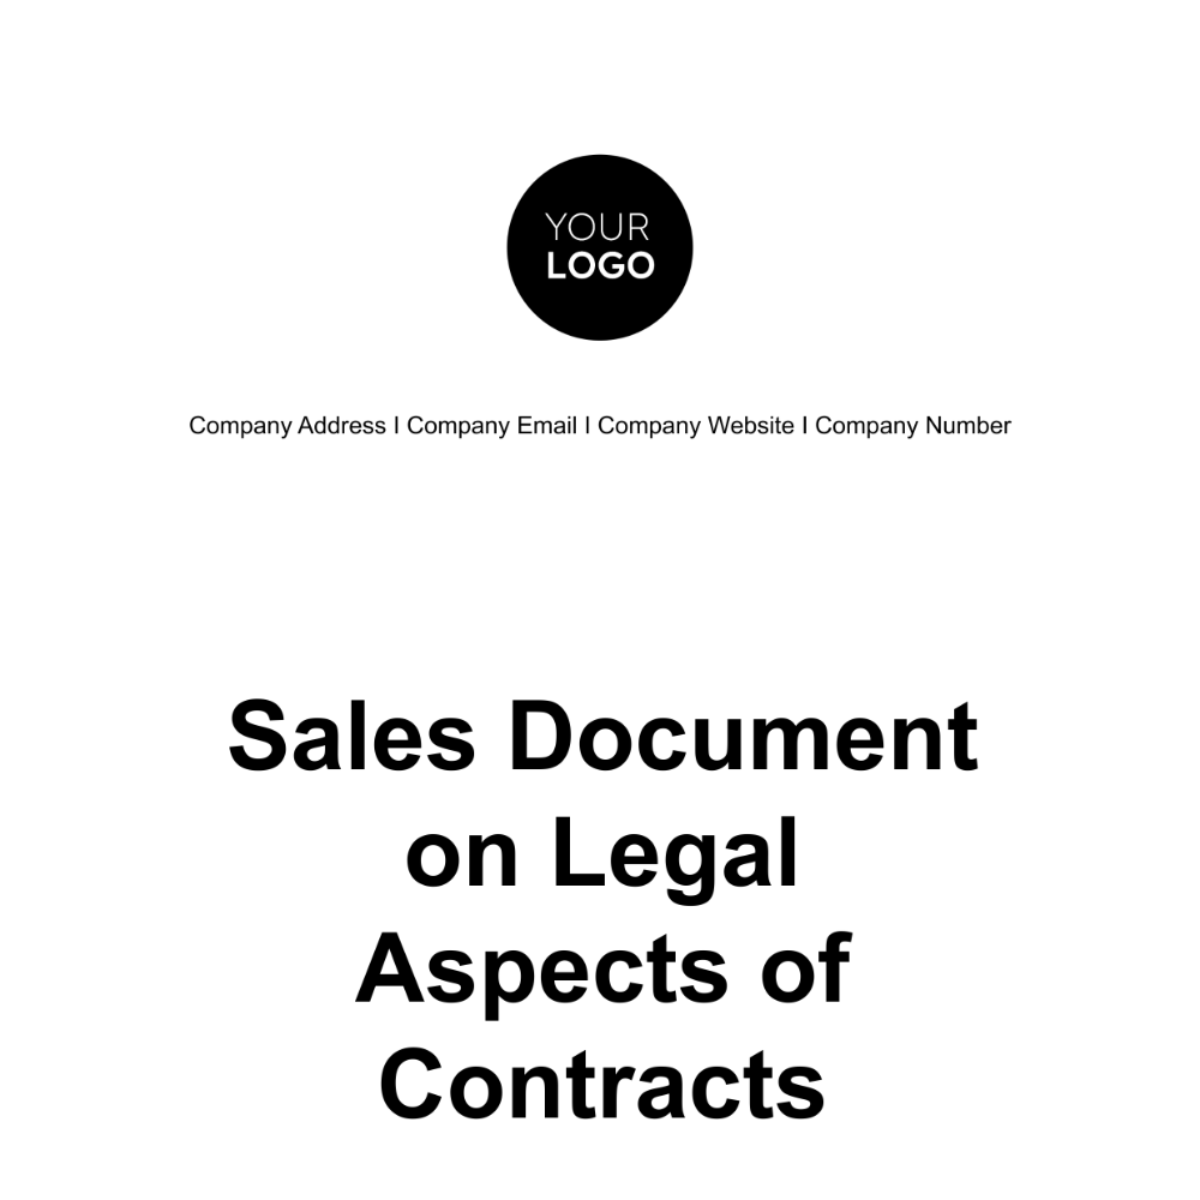 Free Sales Document on Legal Aspects of Contracts Template